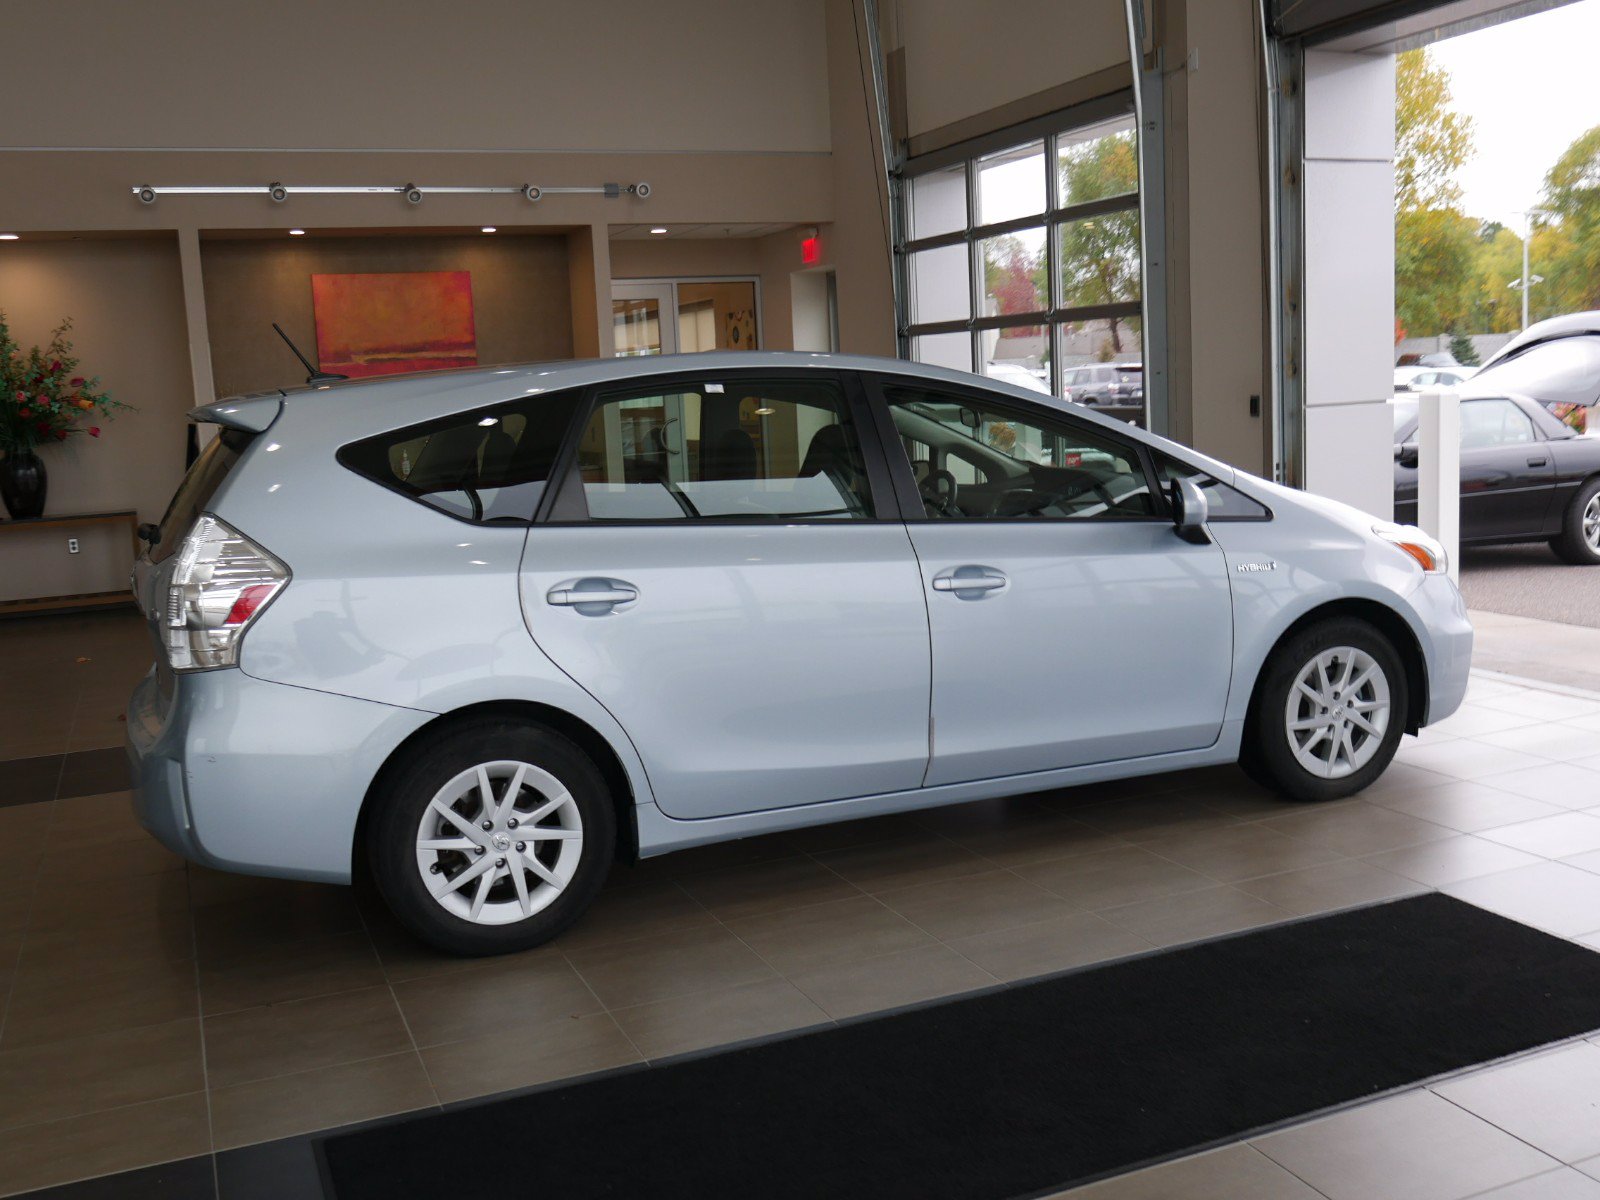 PreOwned 2012 Toyota Prius v Three Station Wagon in